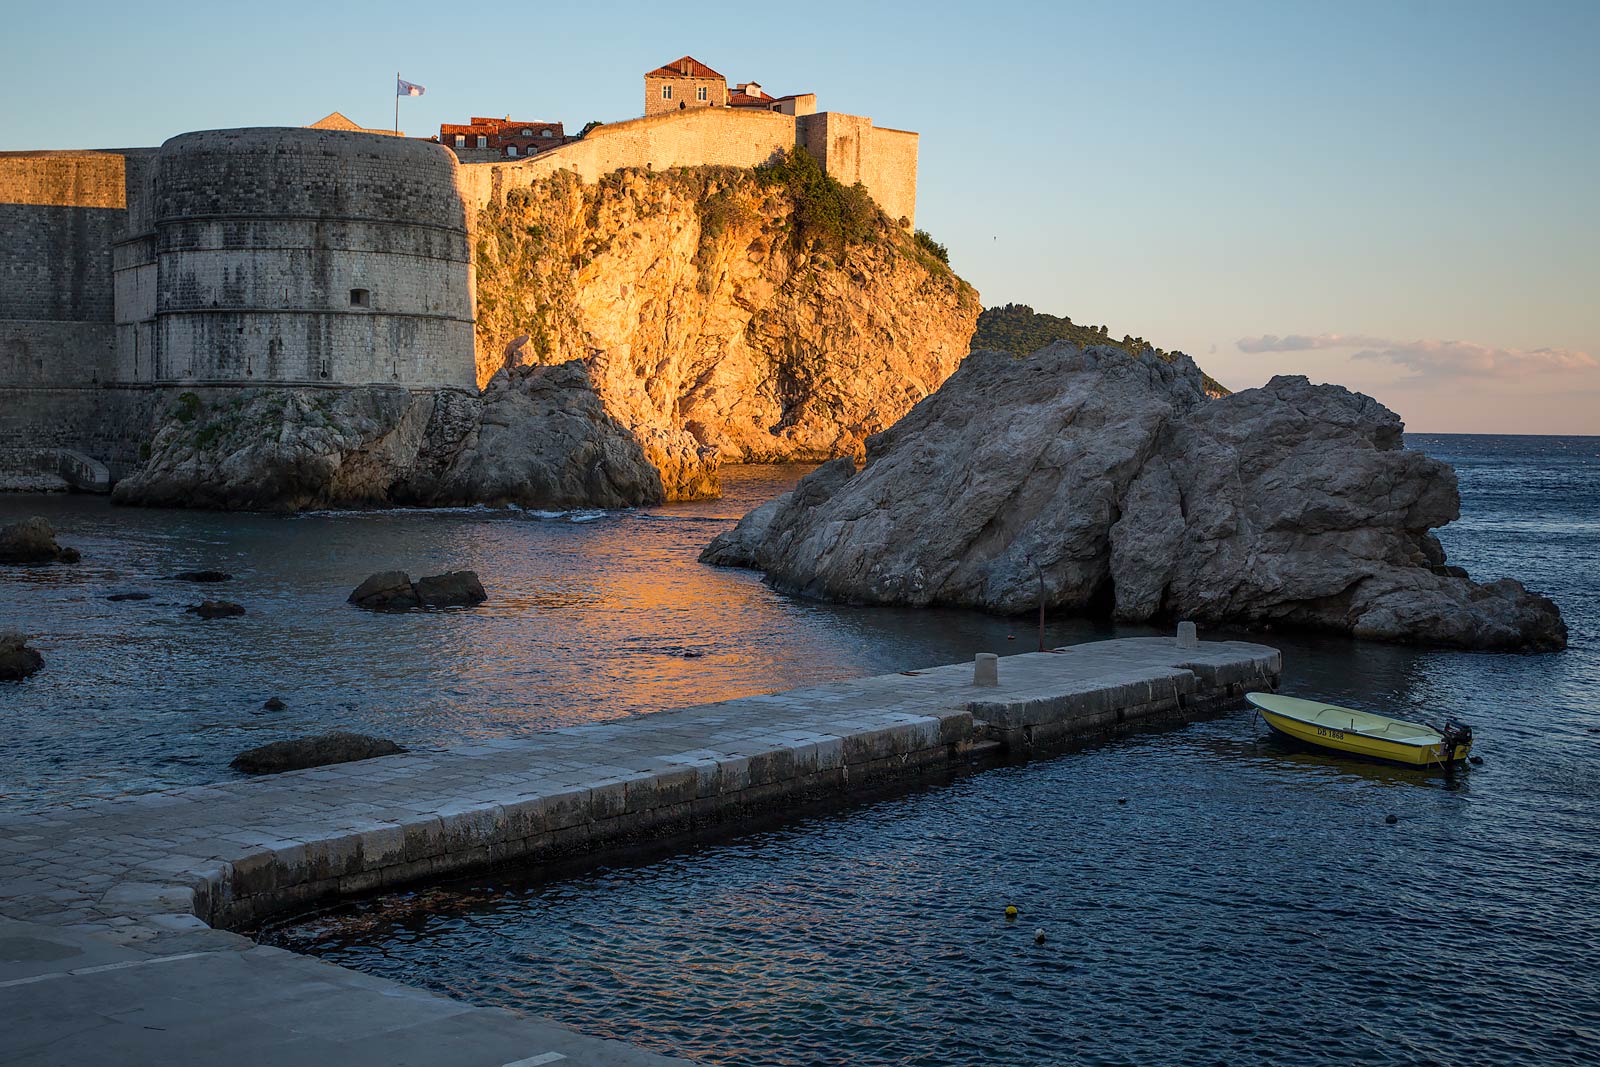 The Dubrovnik city walls from the northern harbor